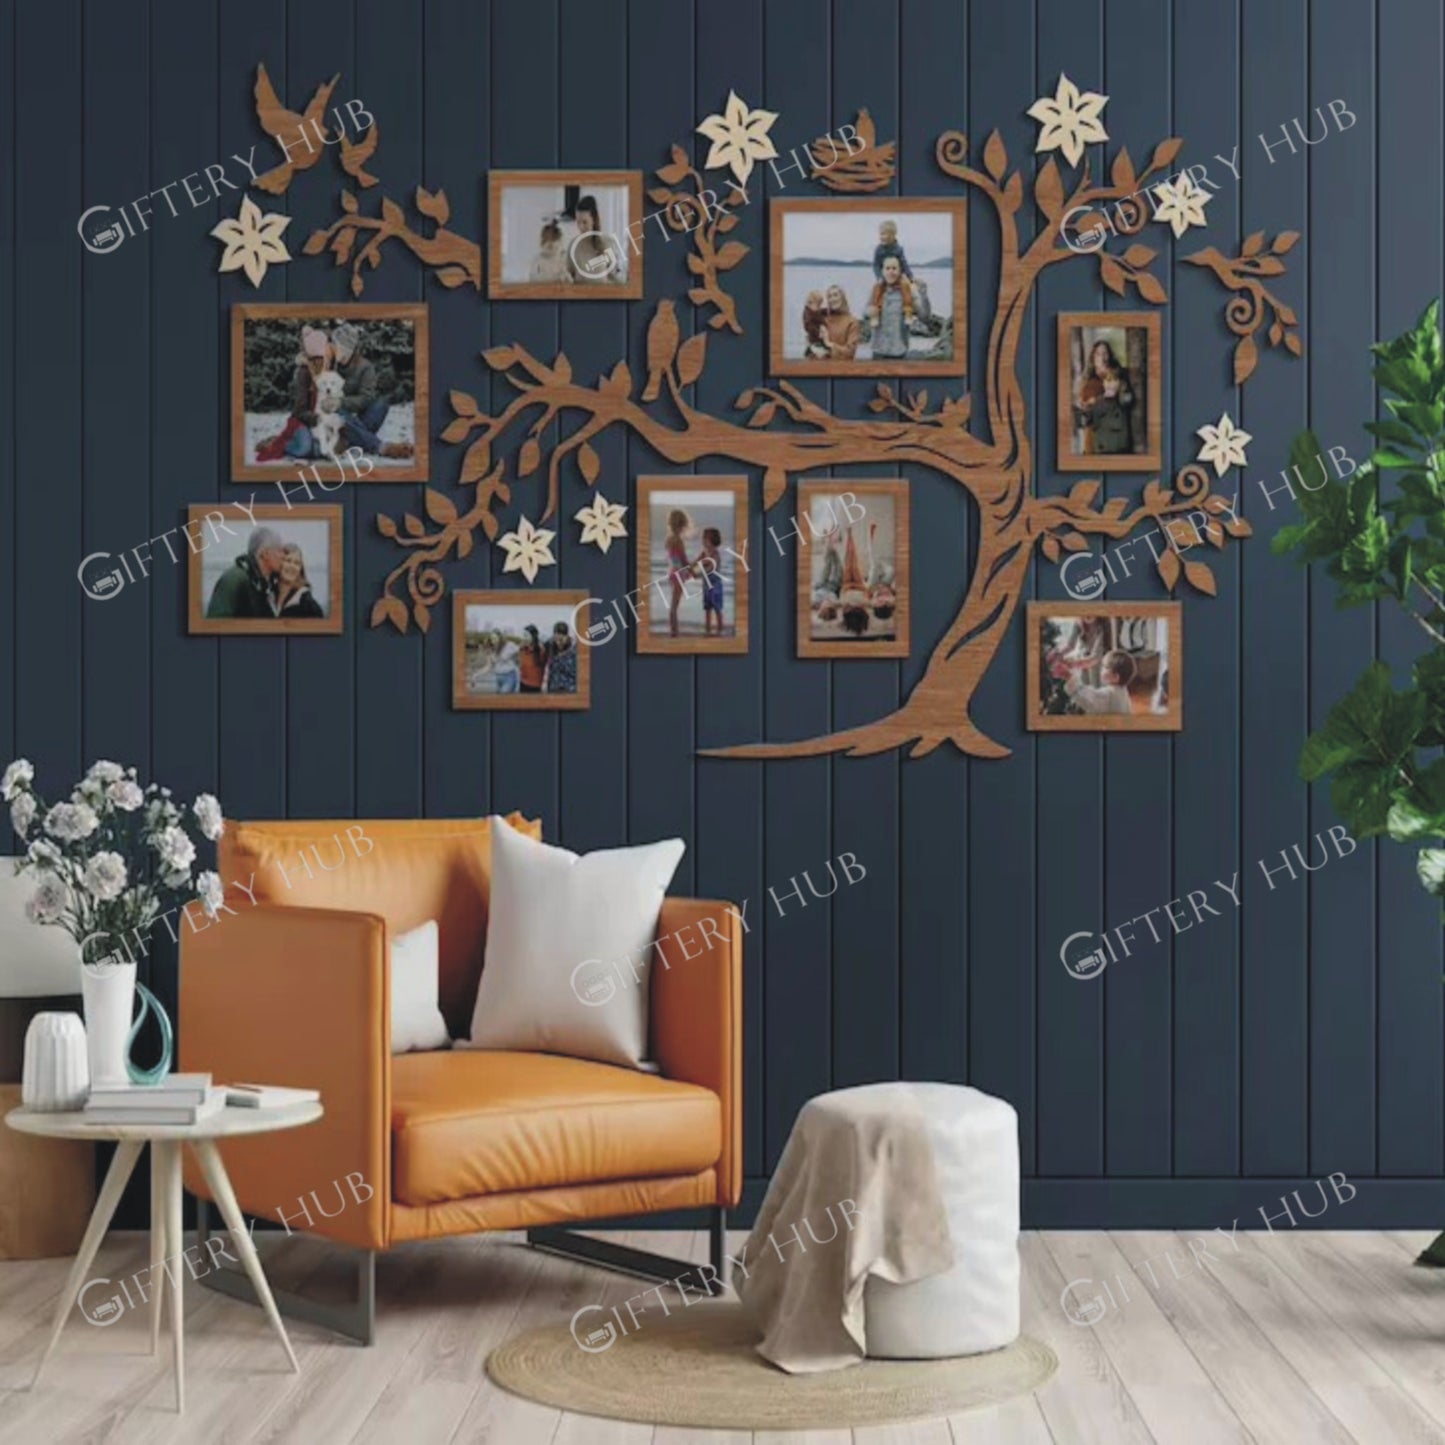 3D Wooden Family tree Art with frames for Wall Decor - WA - 146